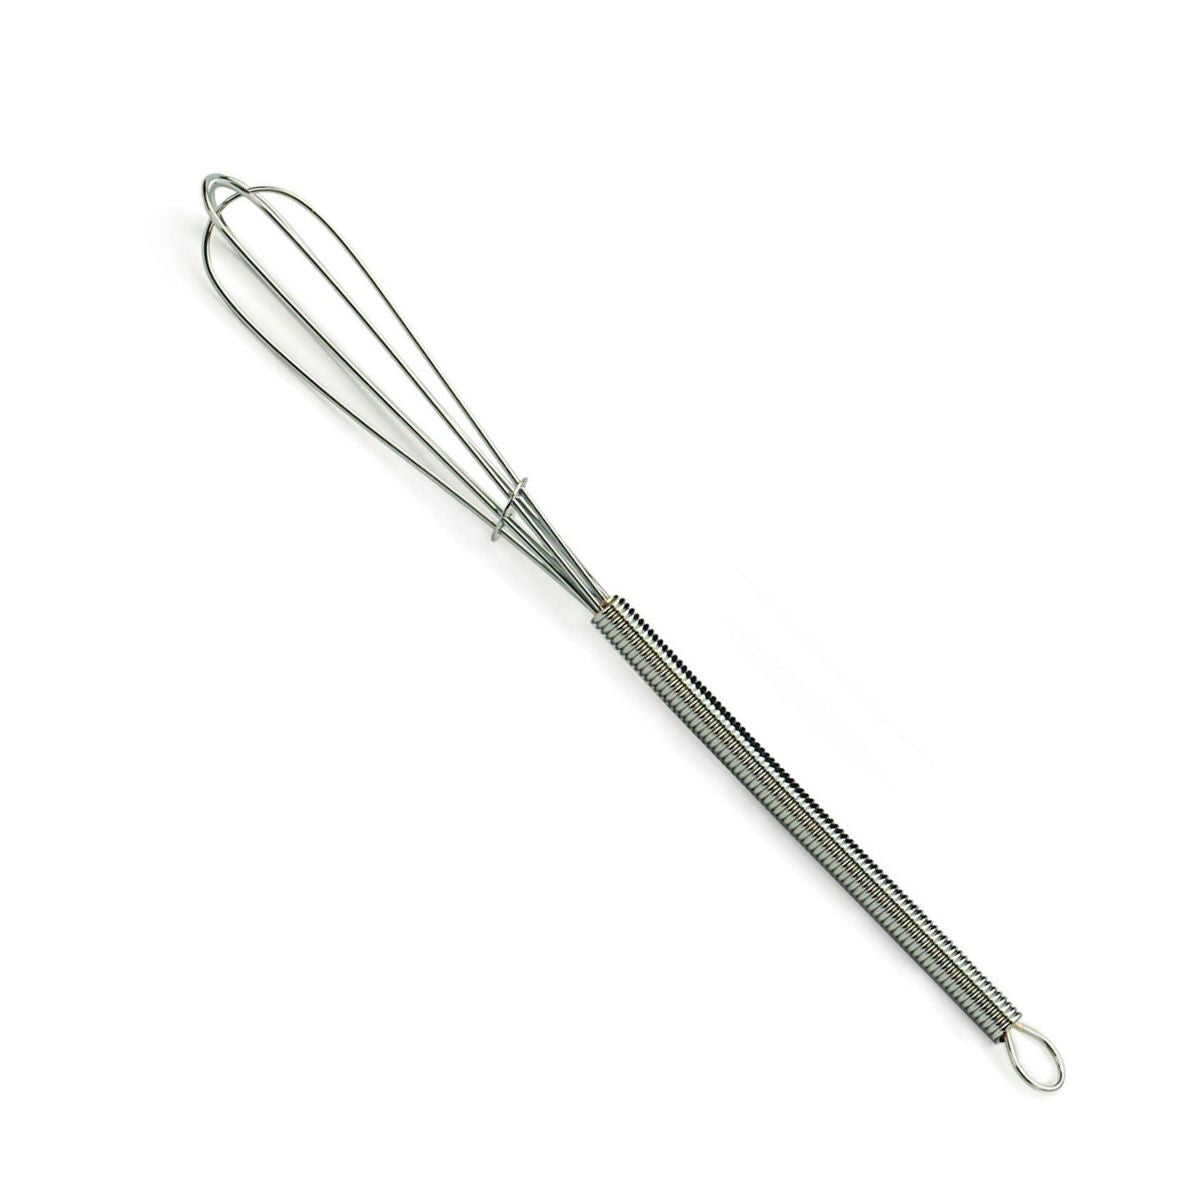 Mini Whisk, 7 Inch long handle whisk